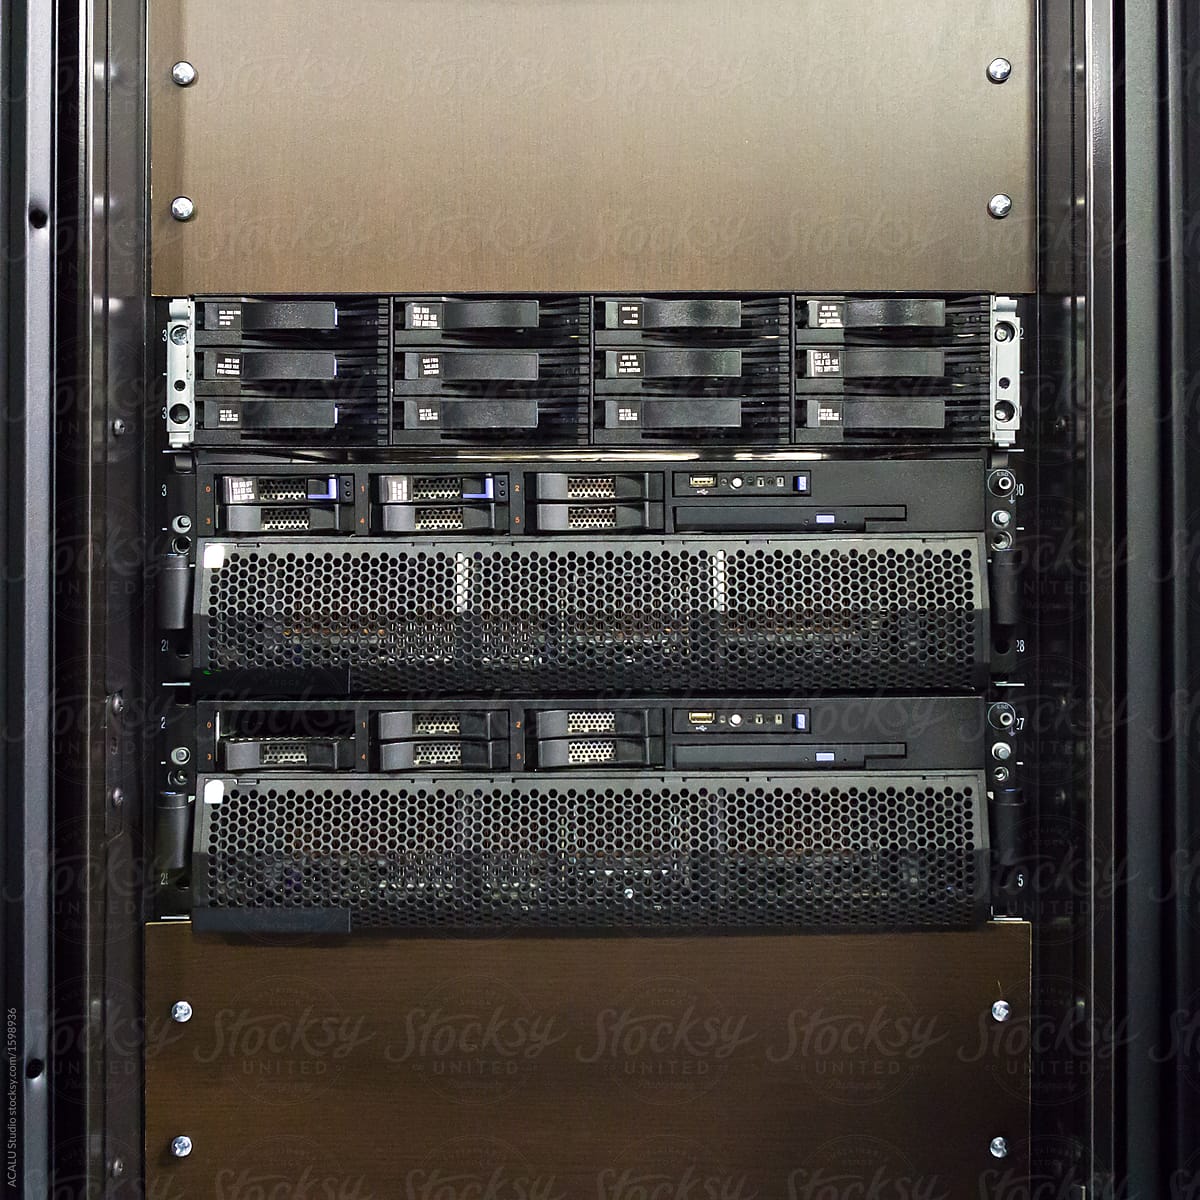 Detail of servers in a rack at a data center